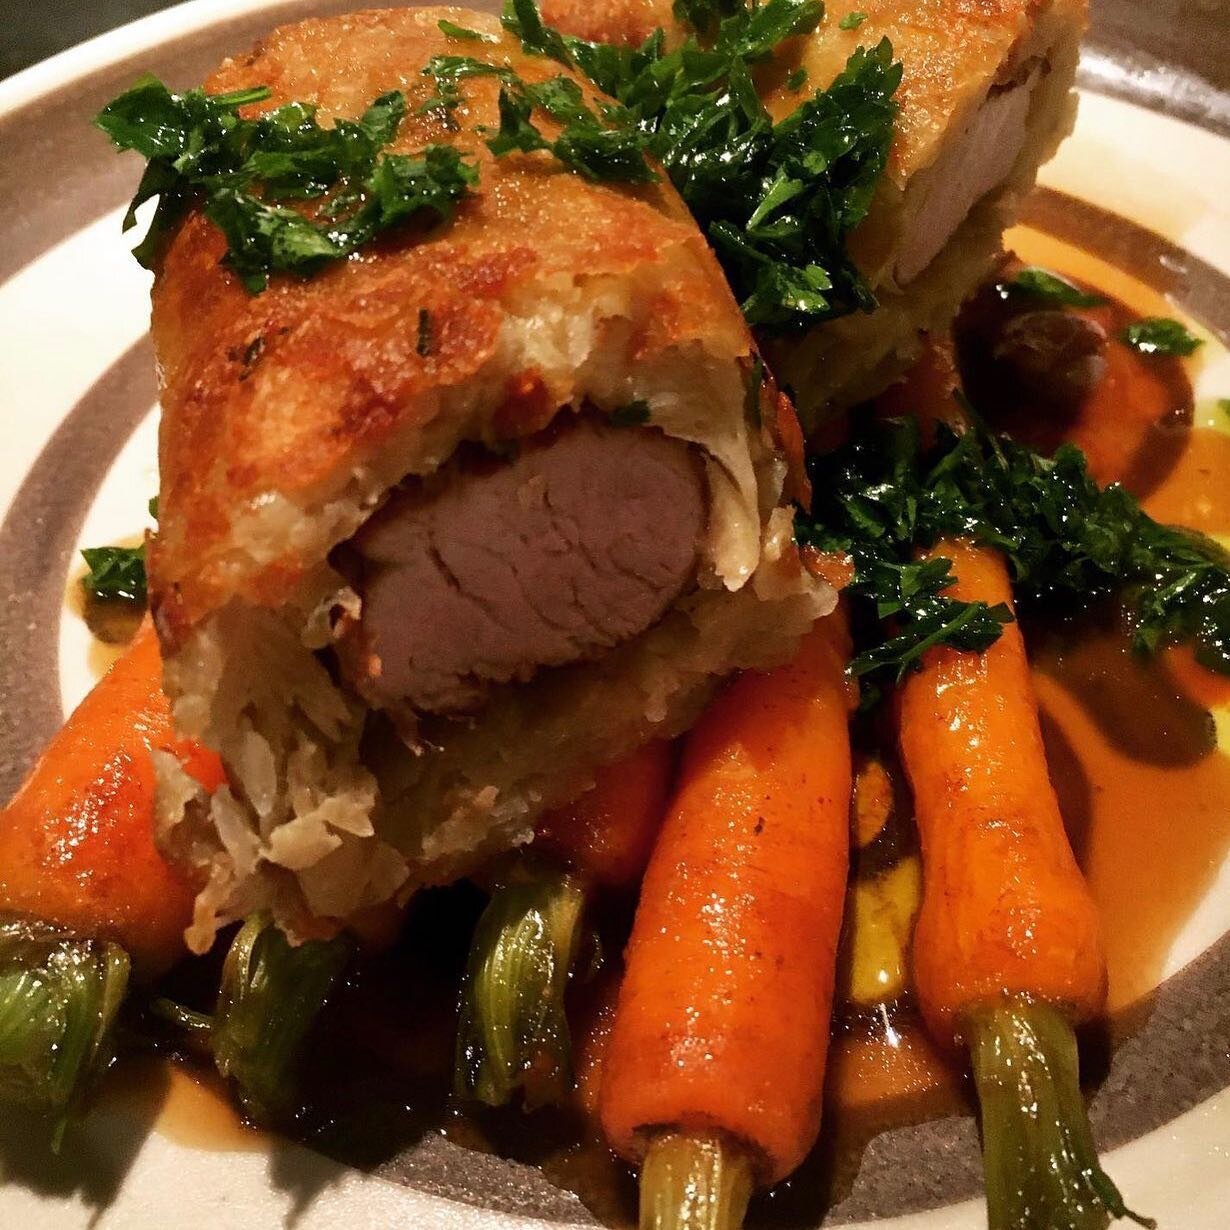 Just to warm you up a bit more our award winning pork fillet encased in potato on a bed of sweet young carrots deliciously created by @wombatbarn going to have to try this one - 💚🔥 #localproduce #regenerativefarming #pastured #wheyfed #pork #berksh